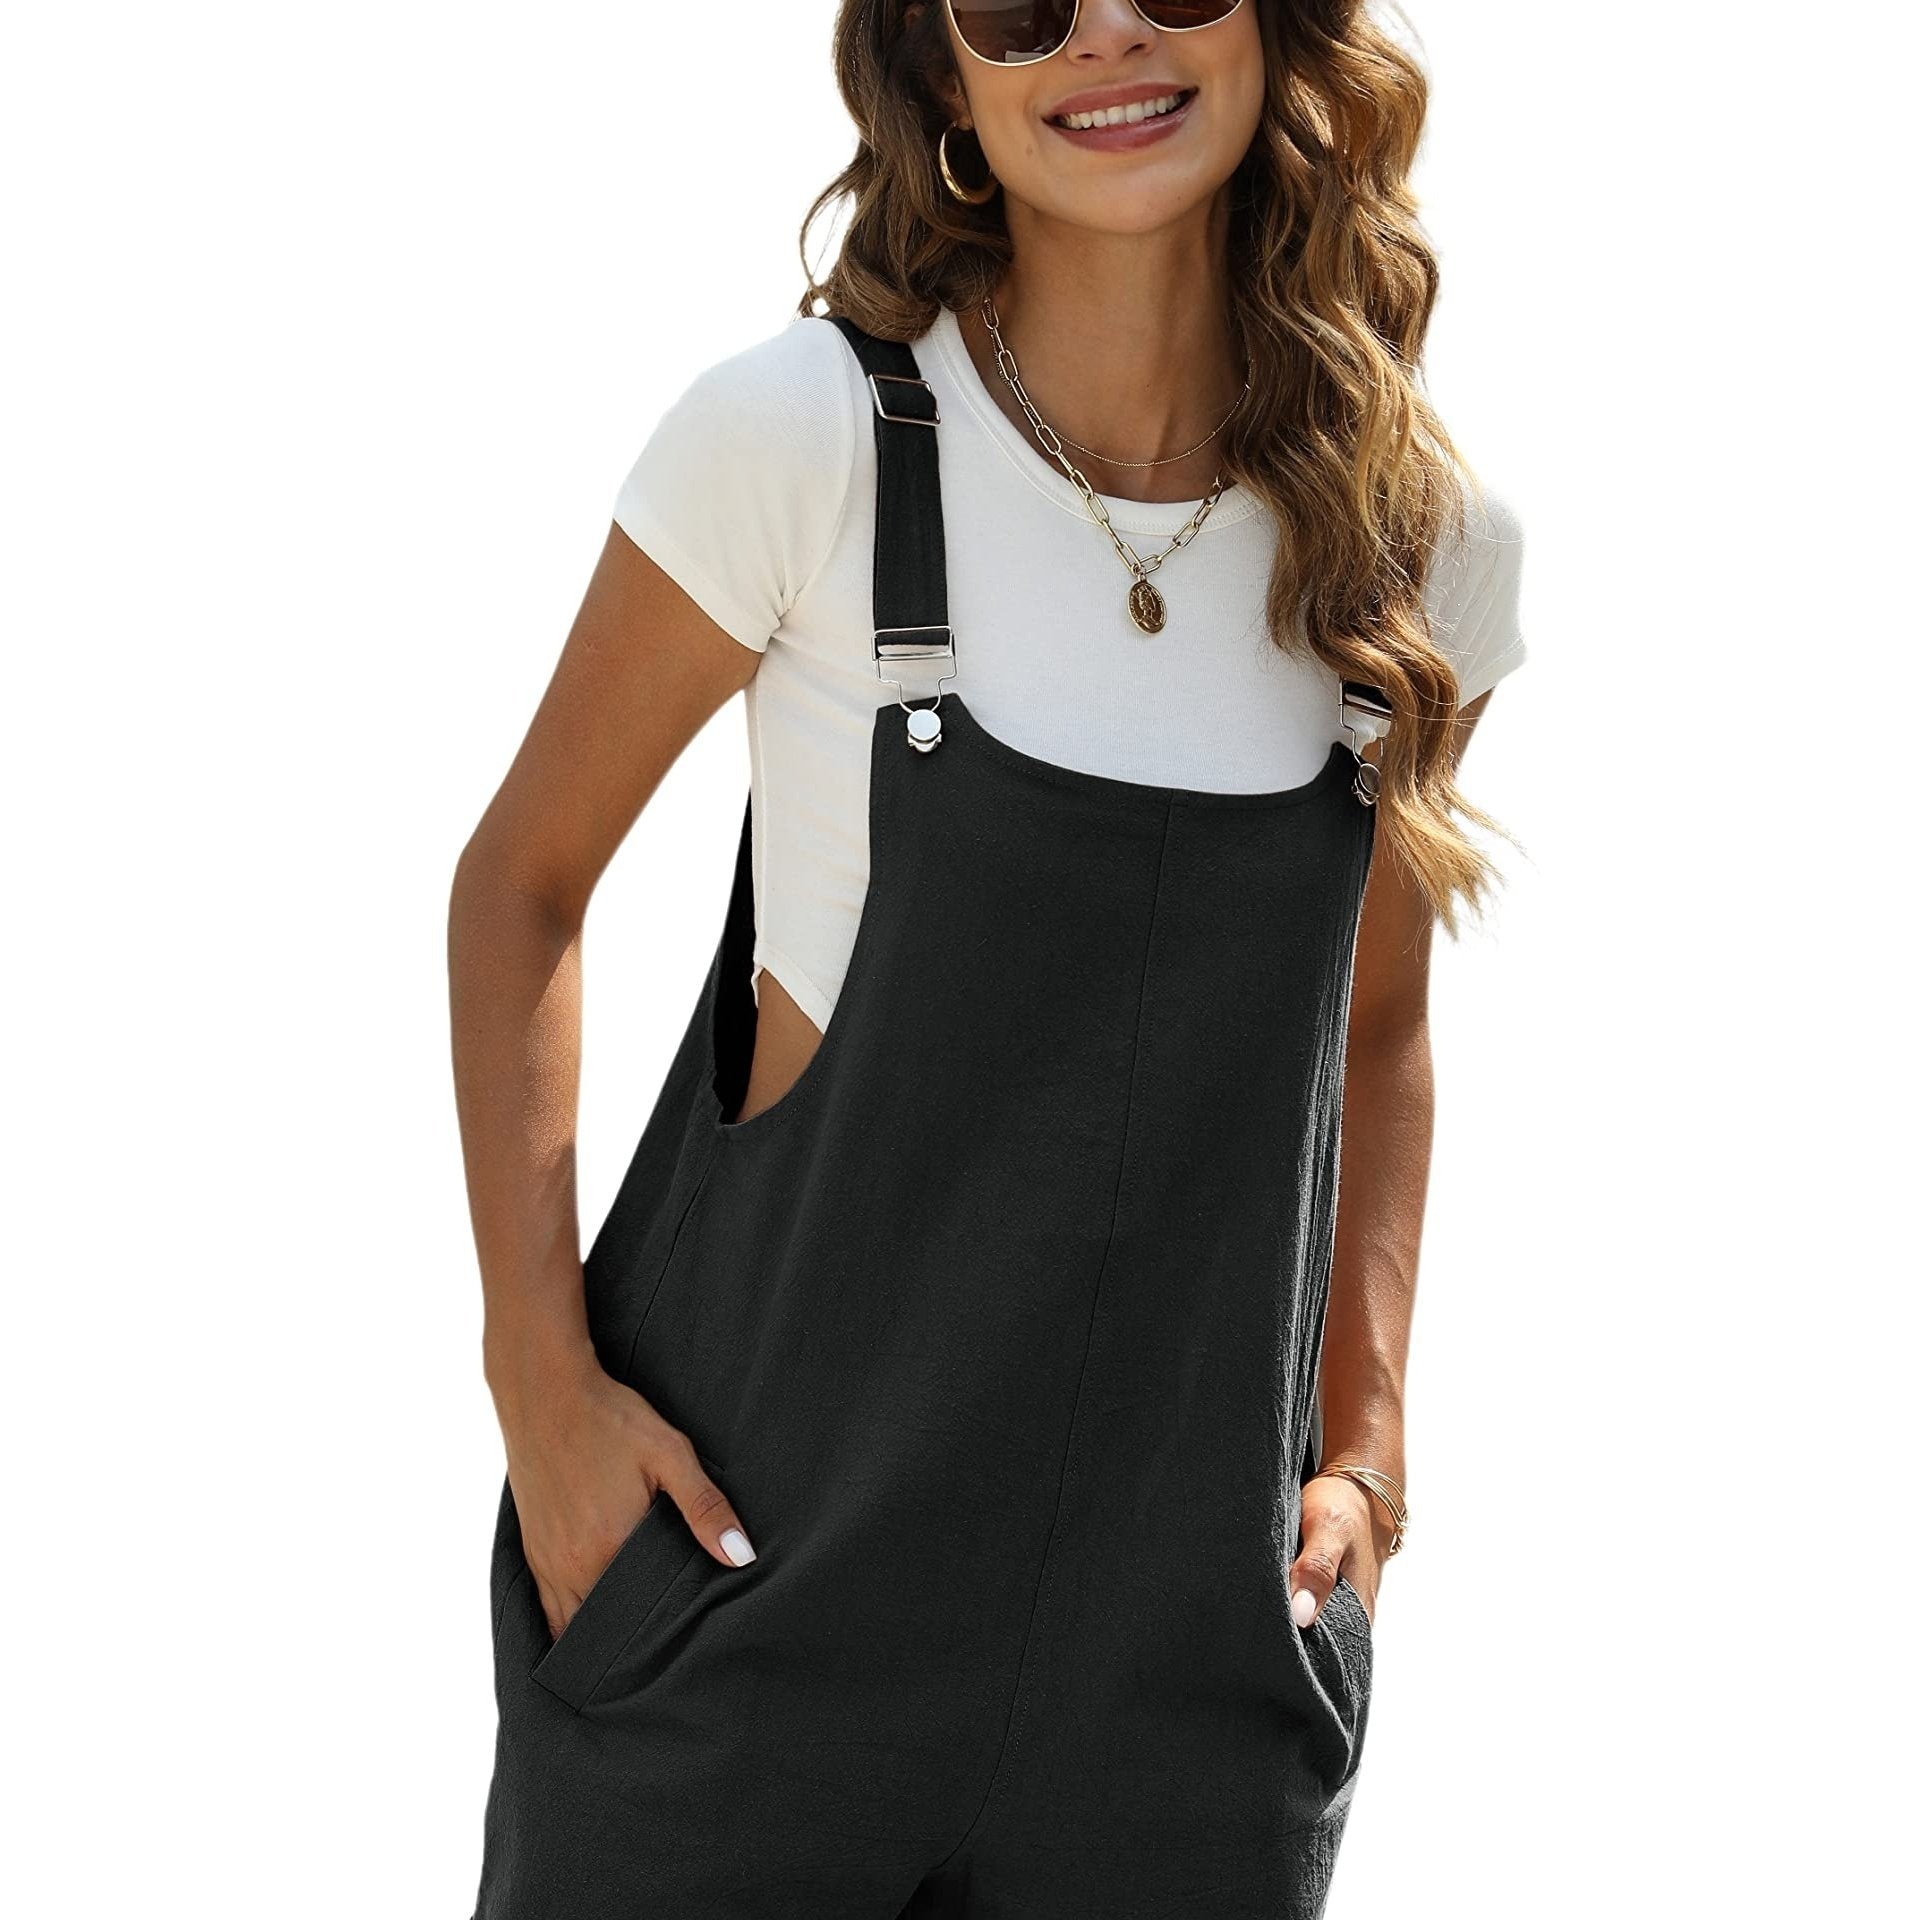 「lovevop」Solid Cami Jumpsuit, Casual Sleeveless Comfy Short Length Jumpsuit With Pockets, Women's Clothing